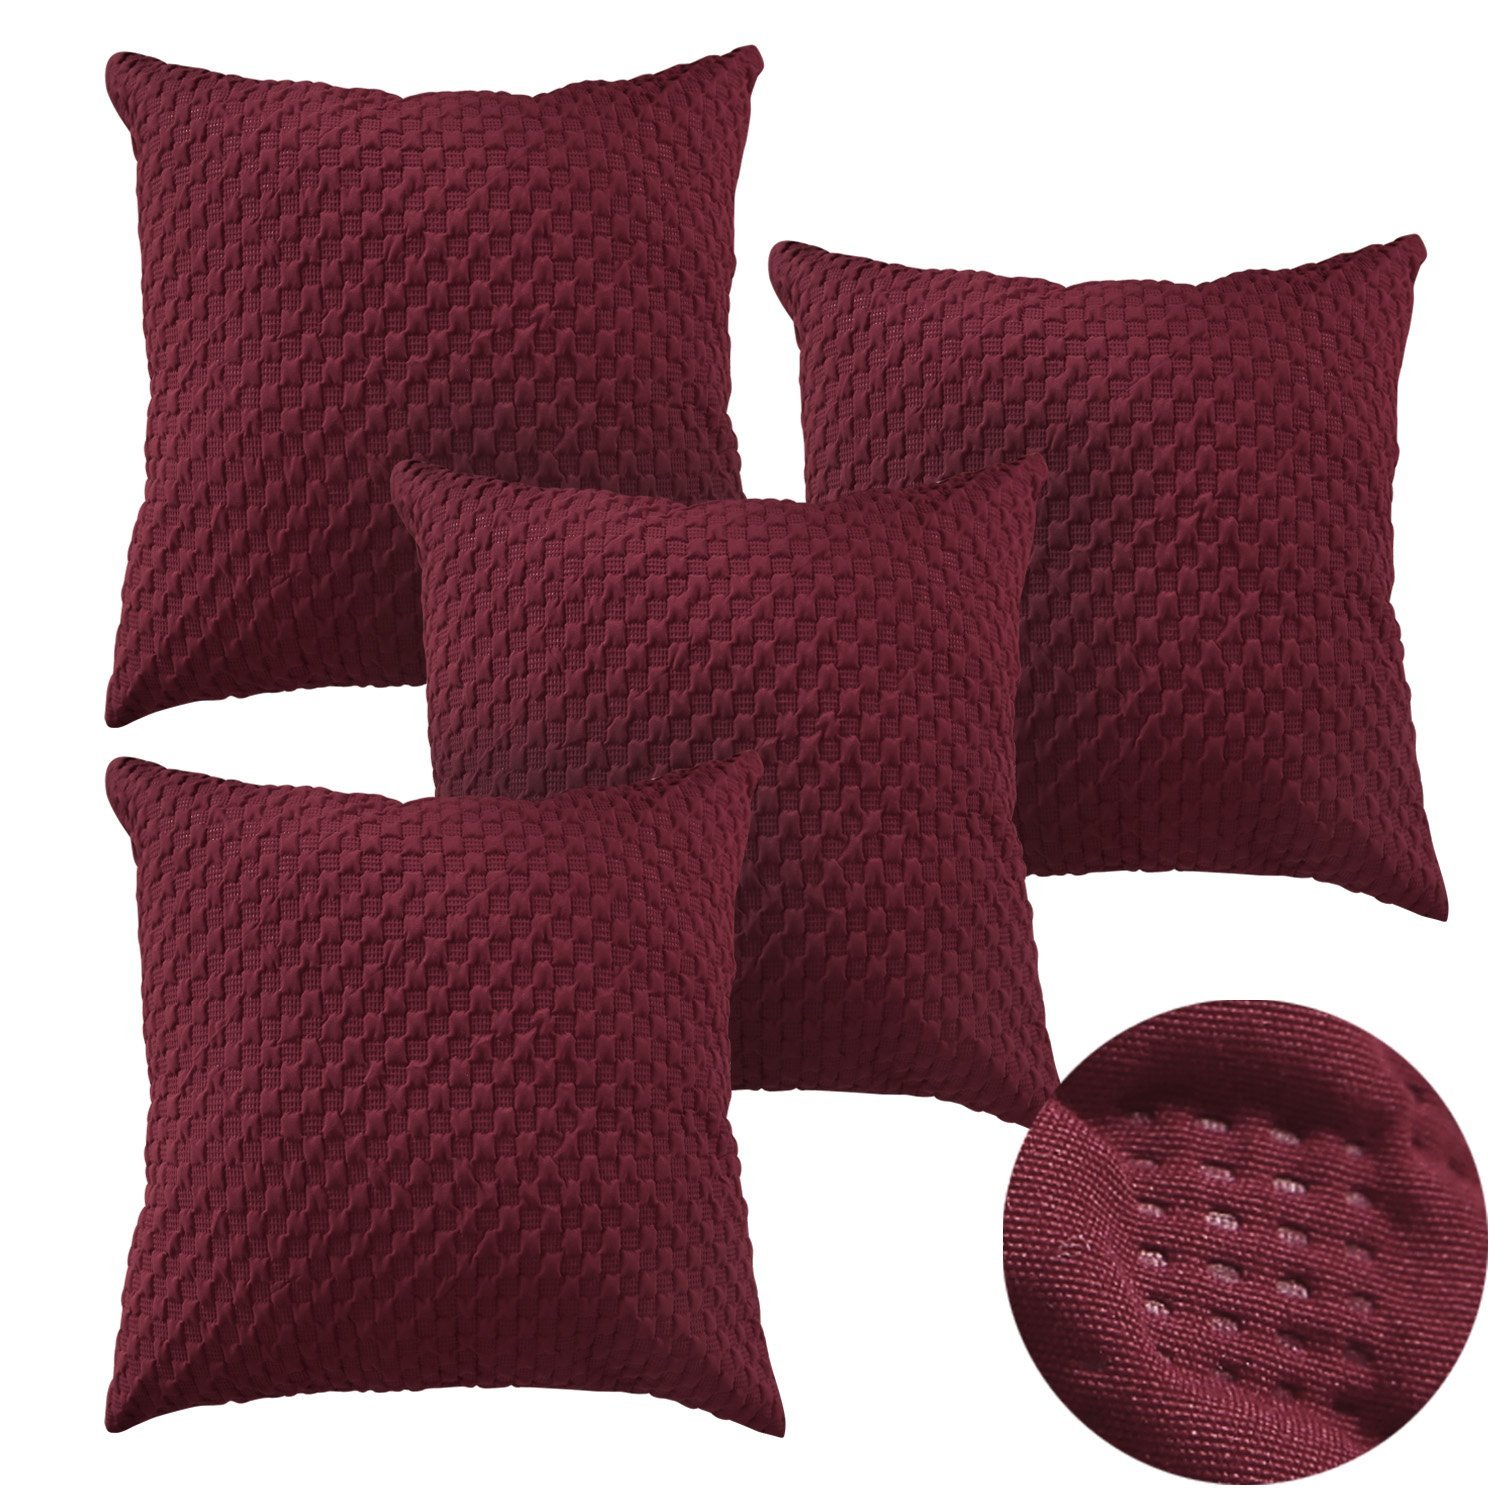 Deconovo Decorative Pillows Super Soft Square Embossd Throw Cushion Covers Pillow Covers Decorative 18 x 18 Inch Date Red Set of 4